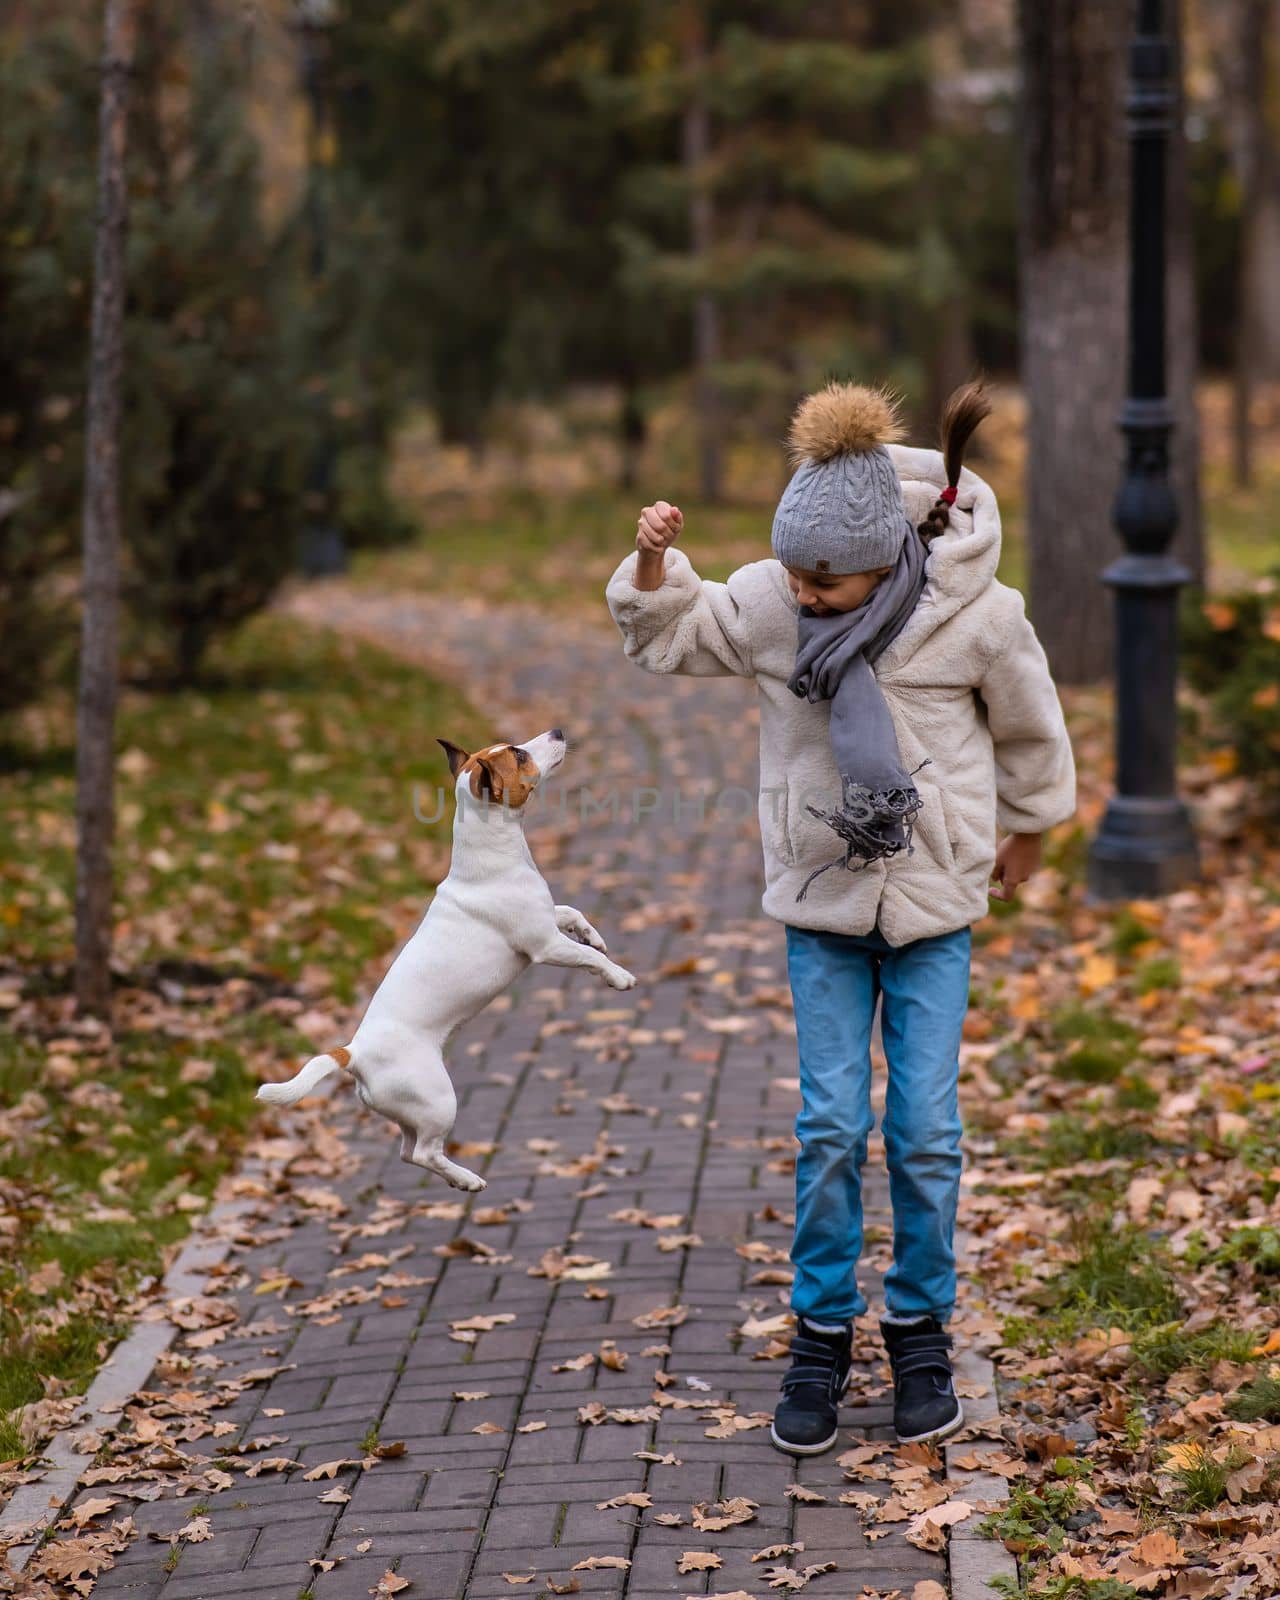 Caucasian girl playing with a dog for a walk in the autumn park. by mrwed54